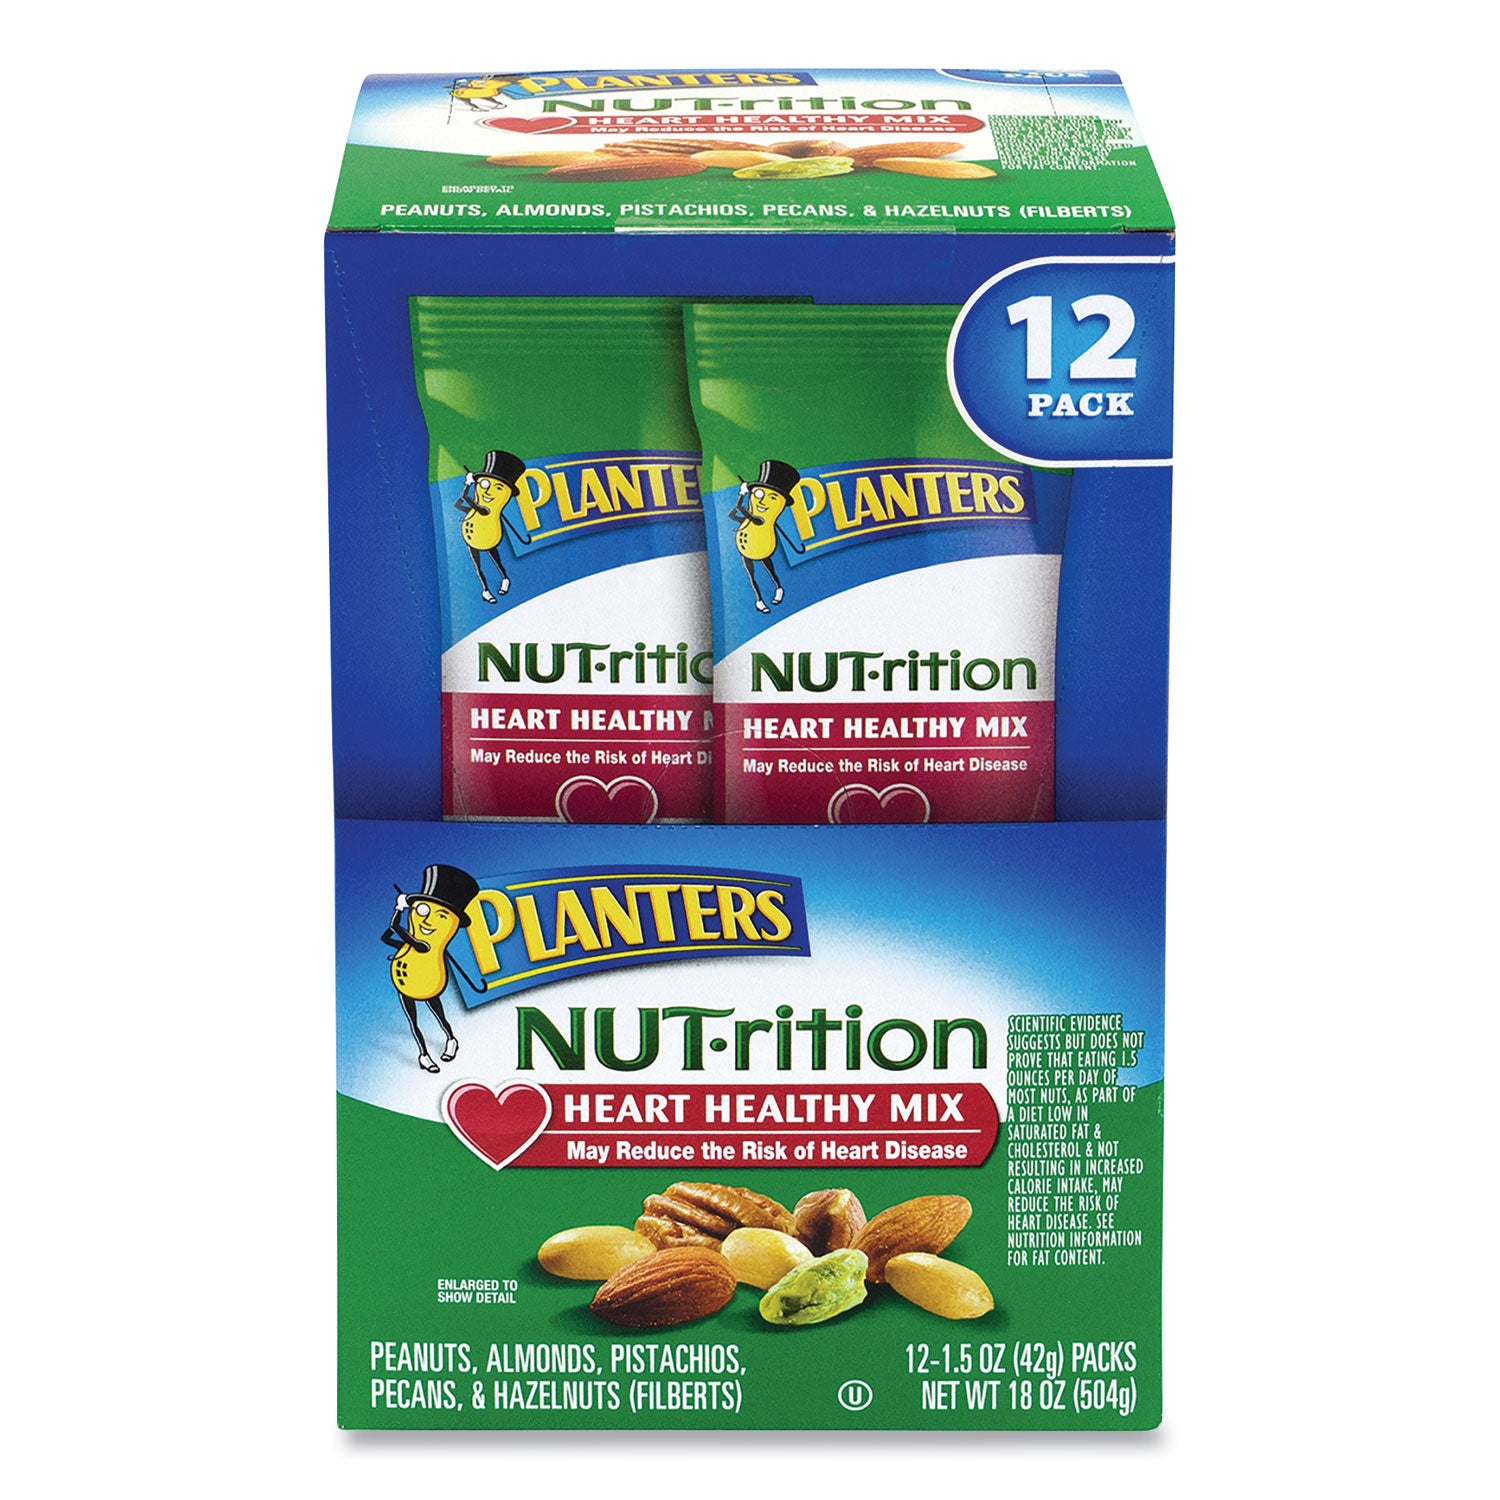 nut-rition-heart-healthy-mix-15-oz-tube-12-tubes-box-ships-in-1-3-business-days_grr22000496 - 2